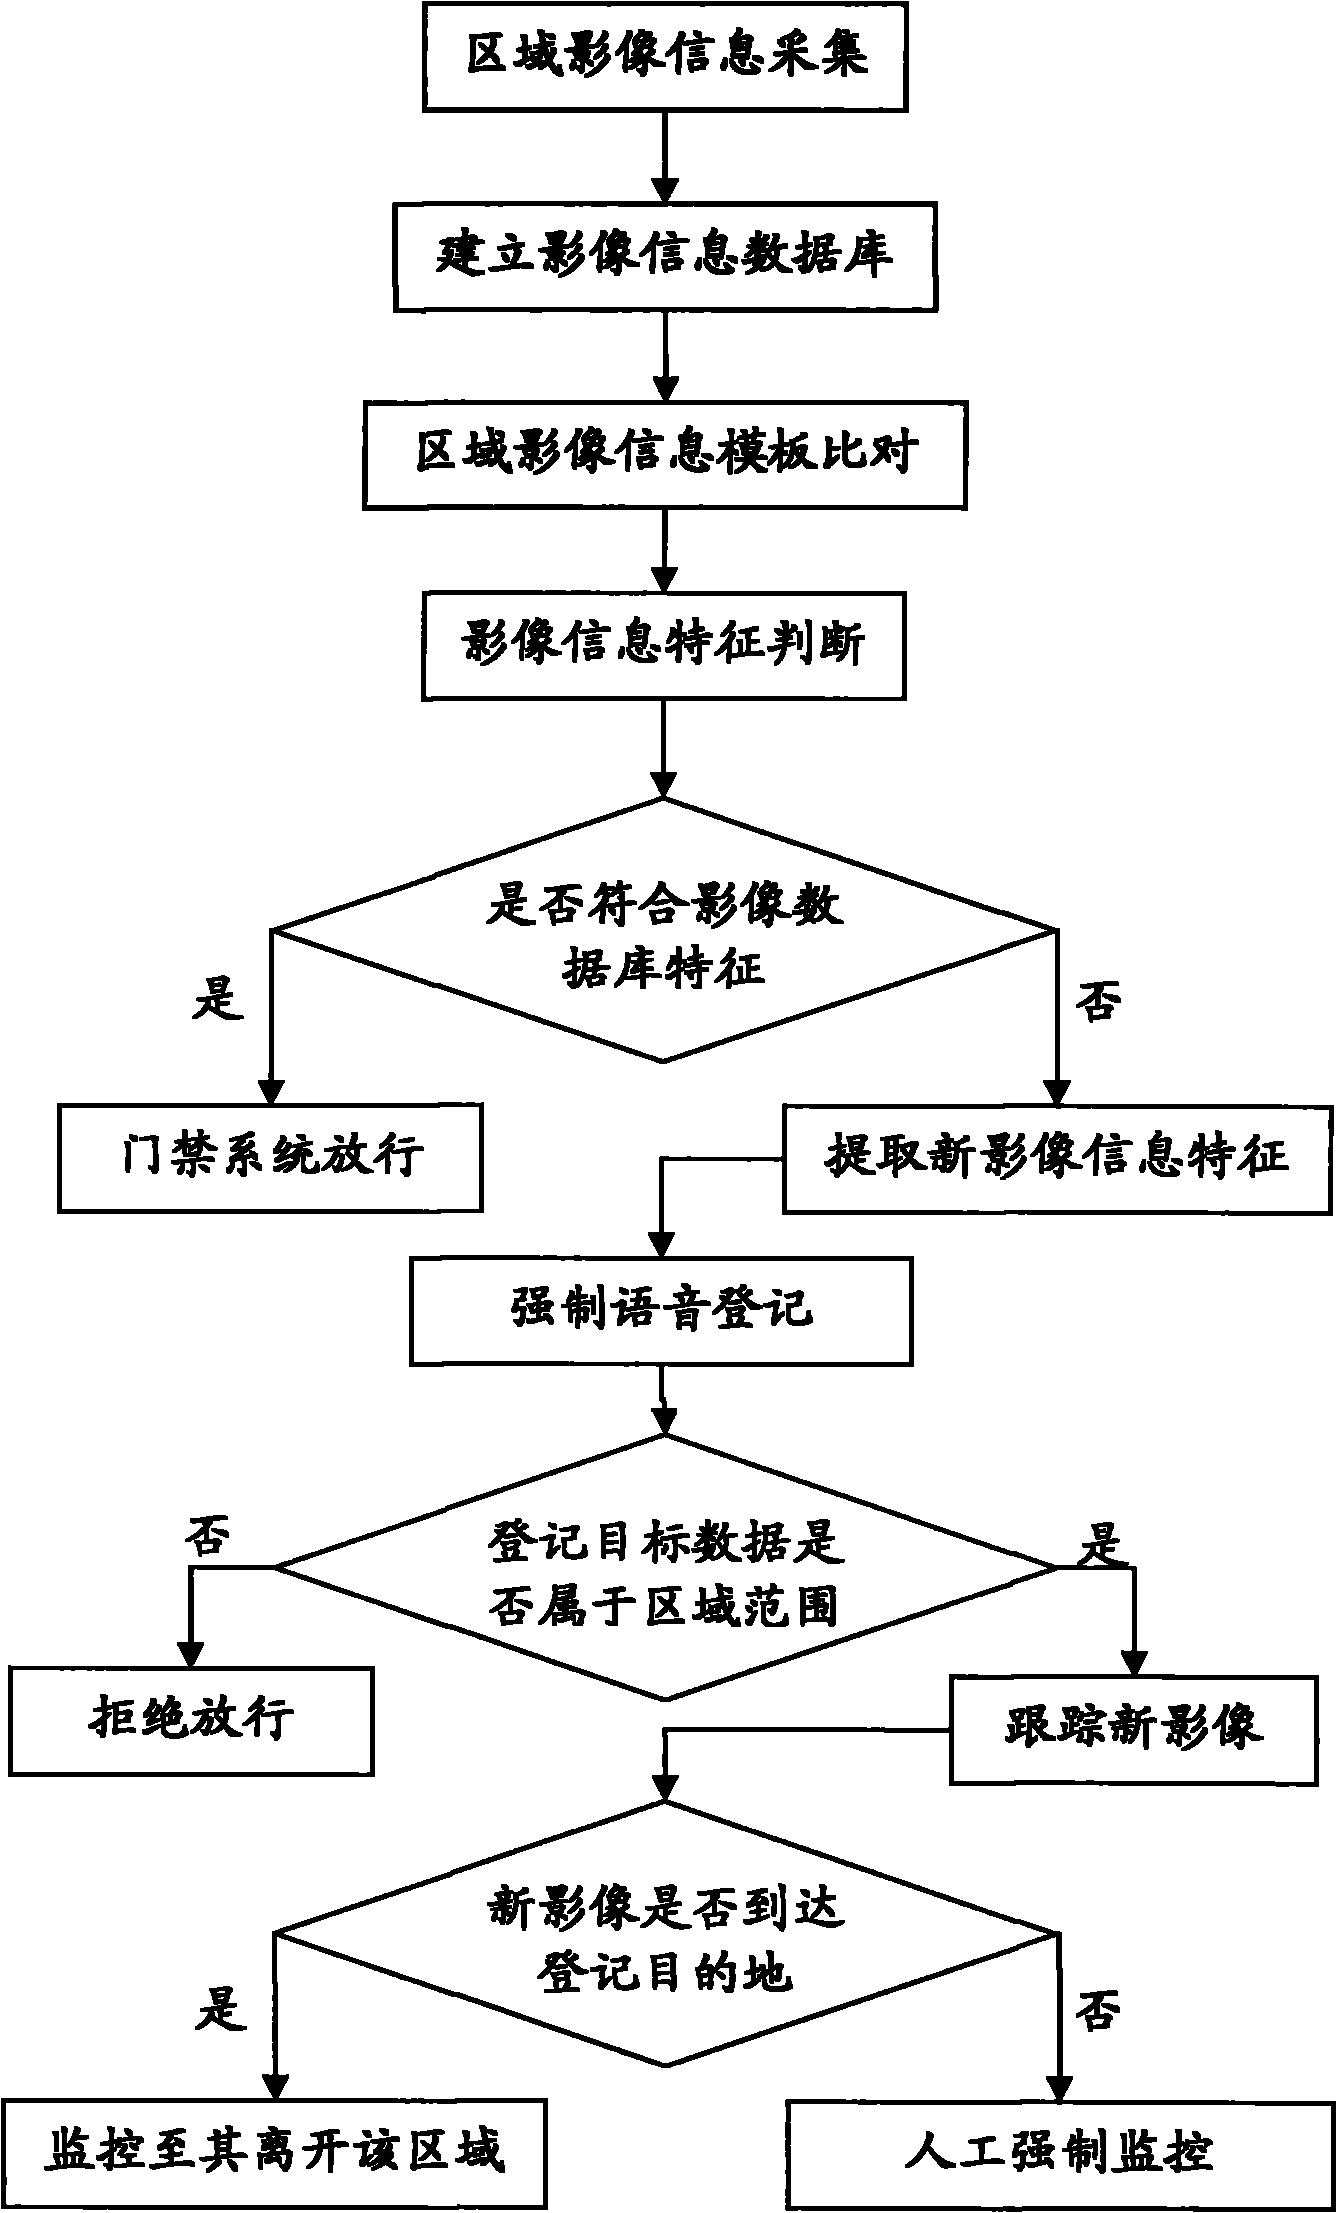 Intelligent monitoring system and monitoring method